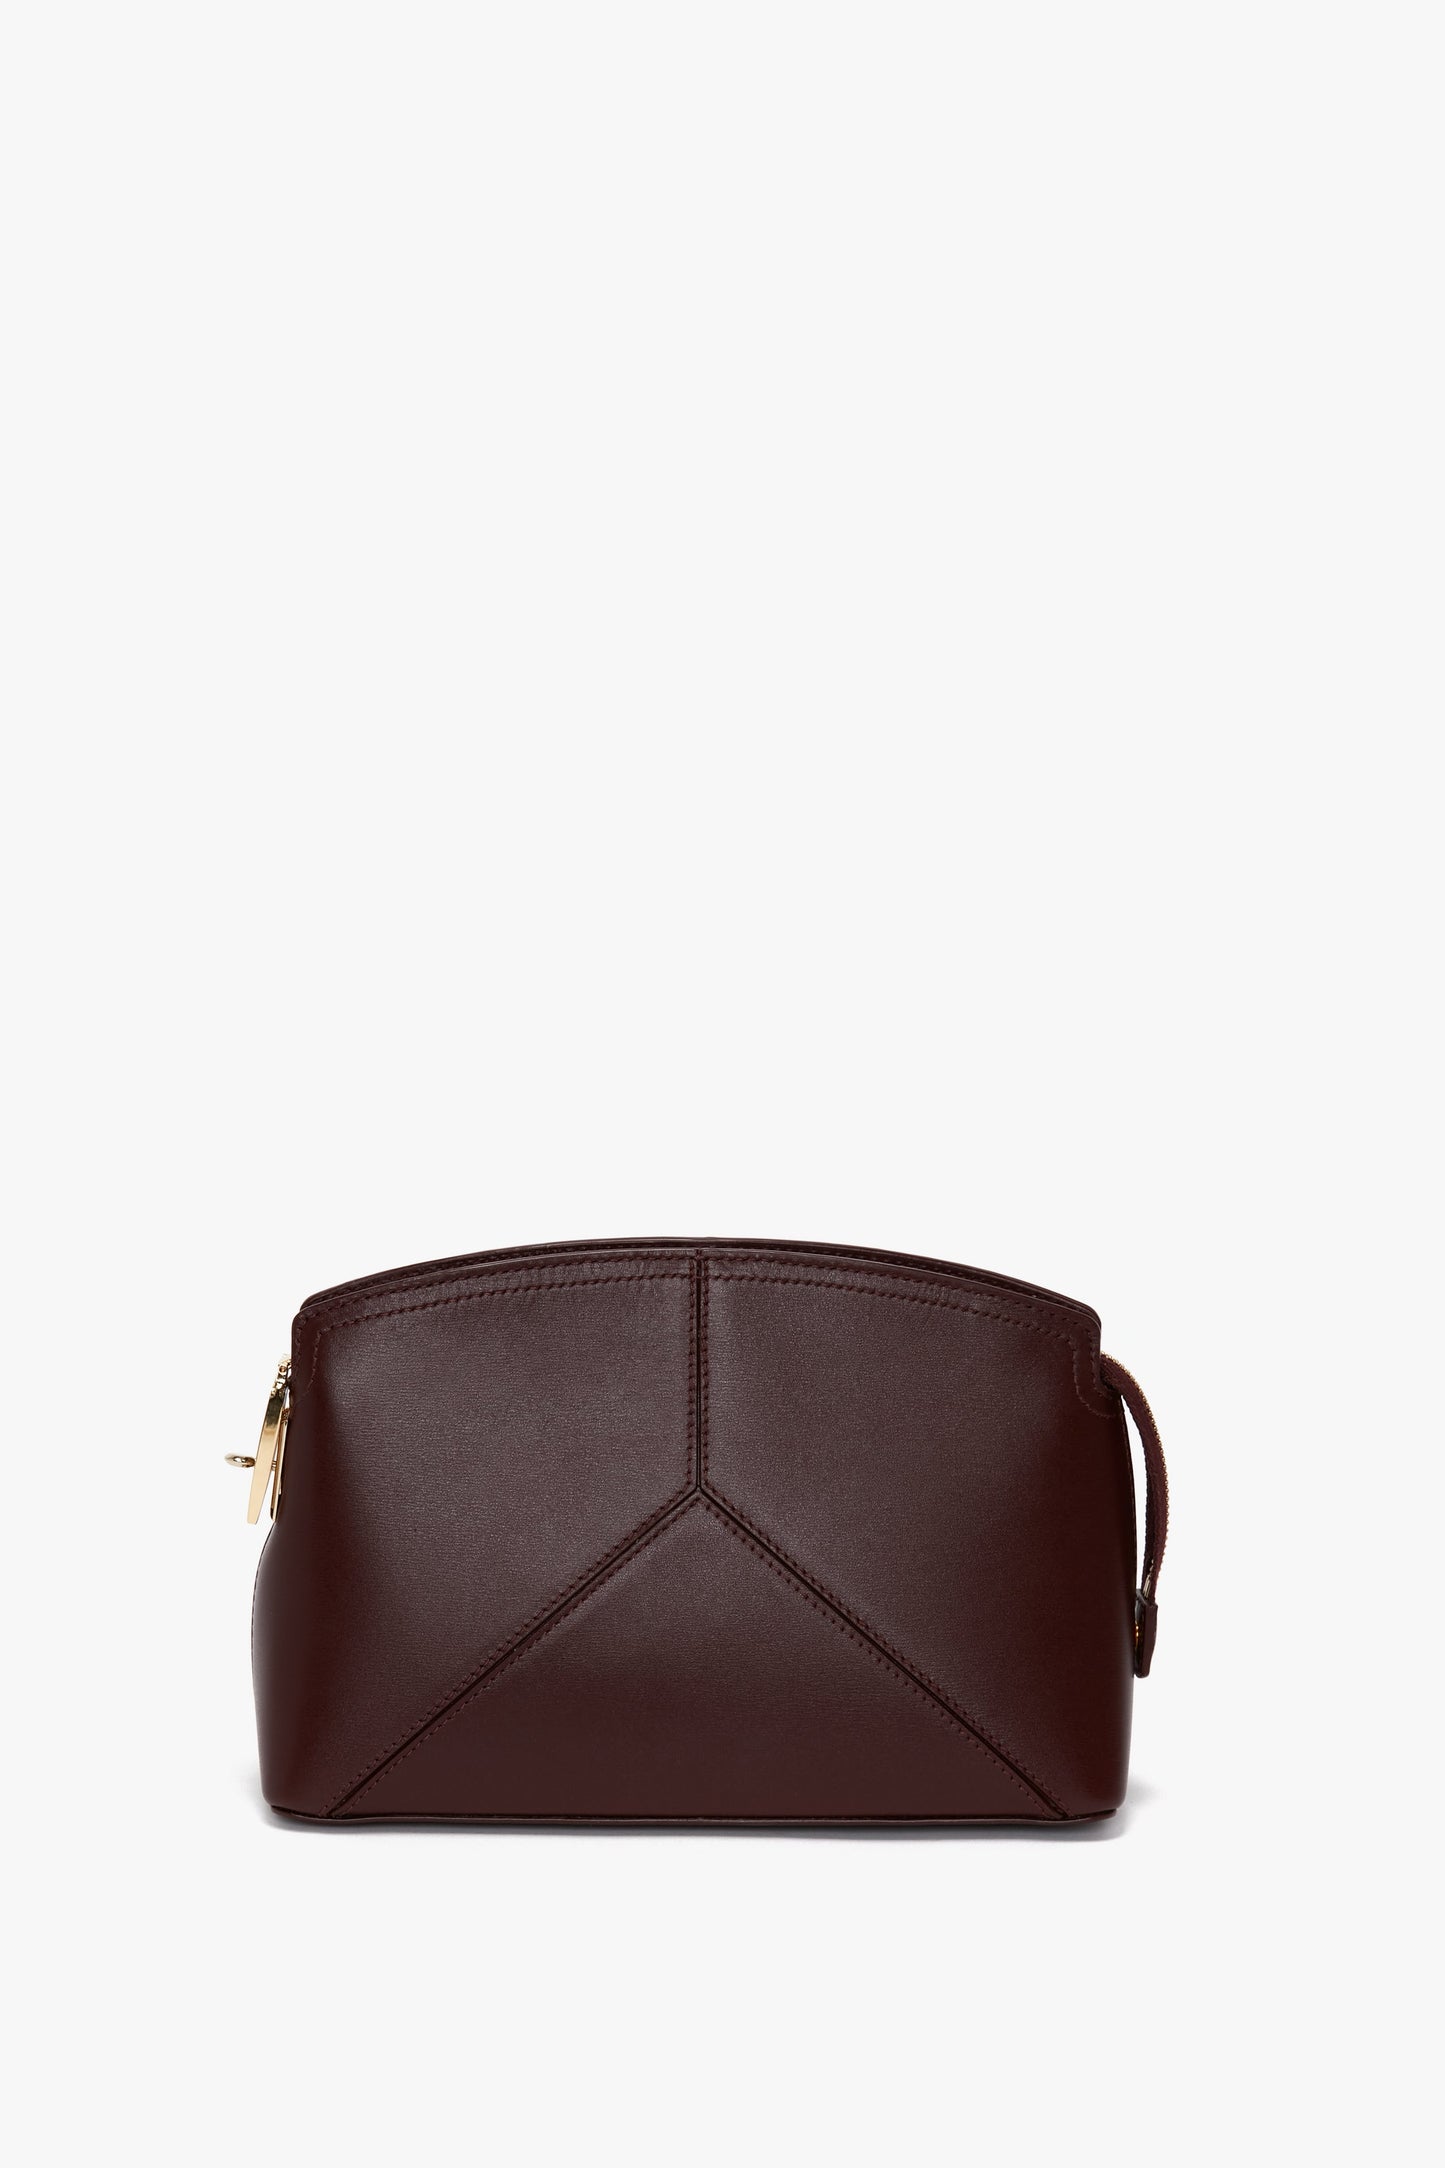 A dark brown leather clutch bag with a geometric design and a gold zipper closure against a white background, made from luxurious burgundy calf leather, has been replaced in the sentence with the Victoria Crossbody Bag In Burgundy Leather by Victoria Beckham.